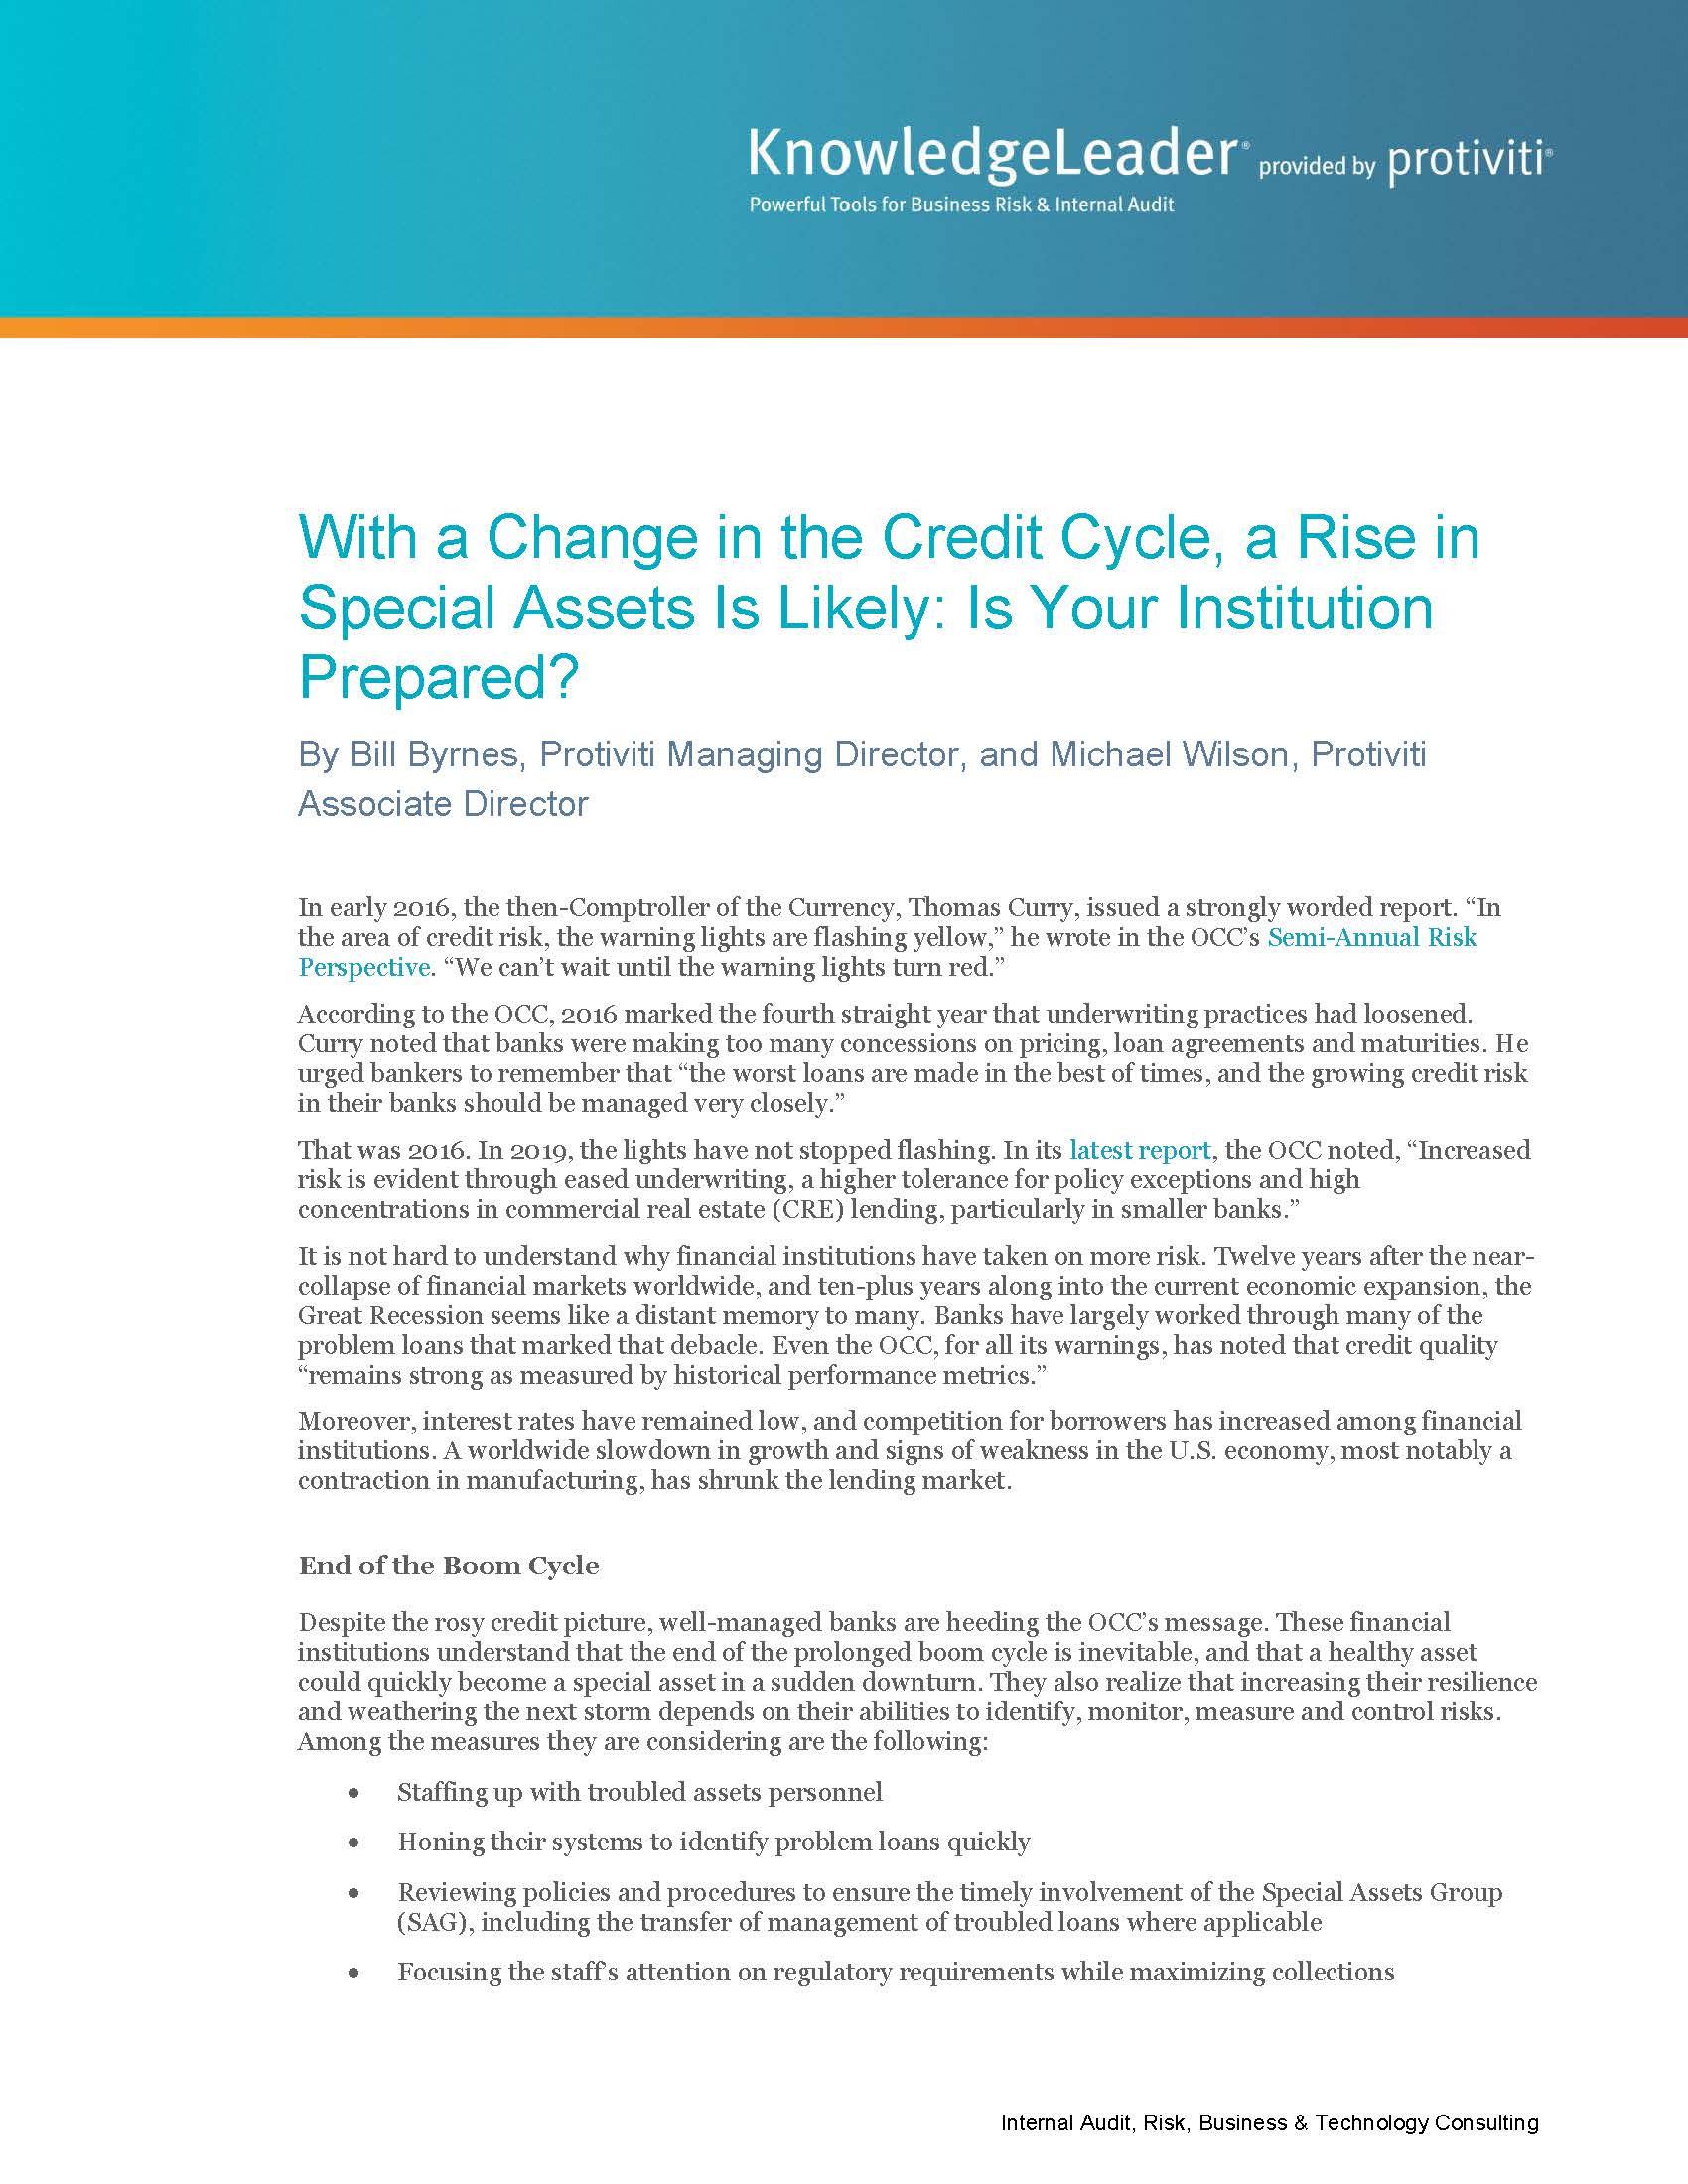 Screenshot of the first page of With a Change in the Credit Cycle, a Rise in Special Assets Is Likely: Is Your Institution Prepared?